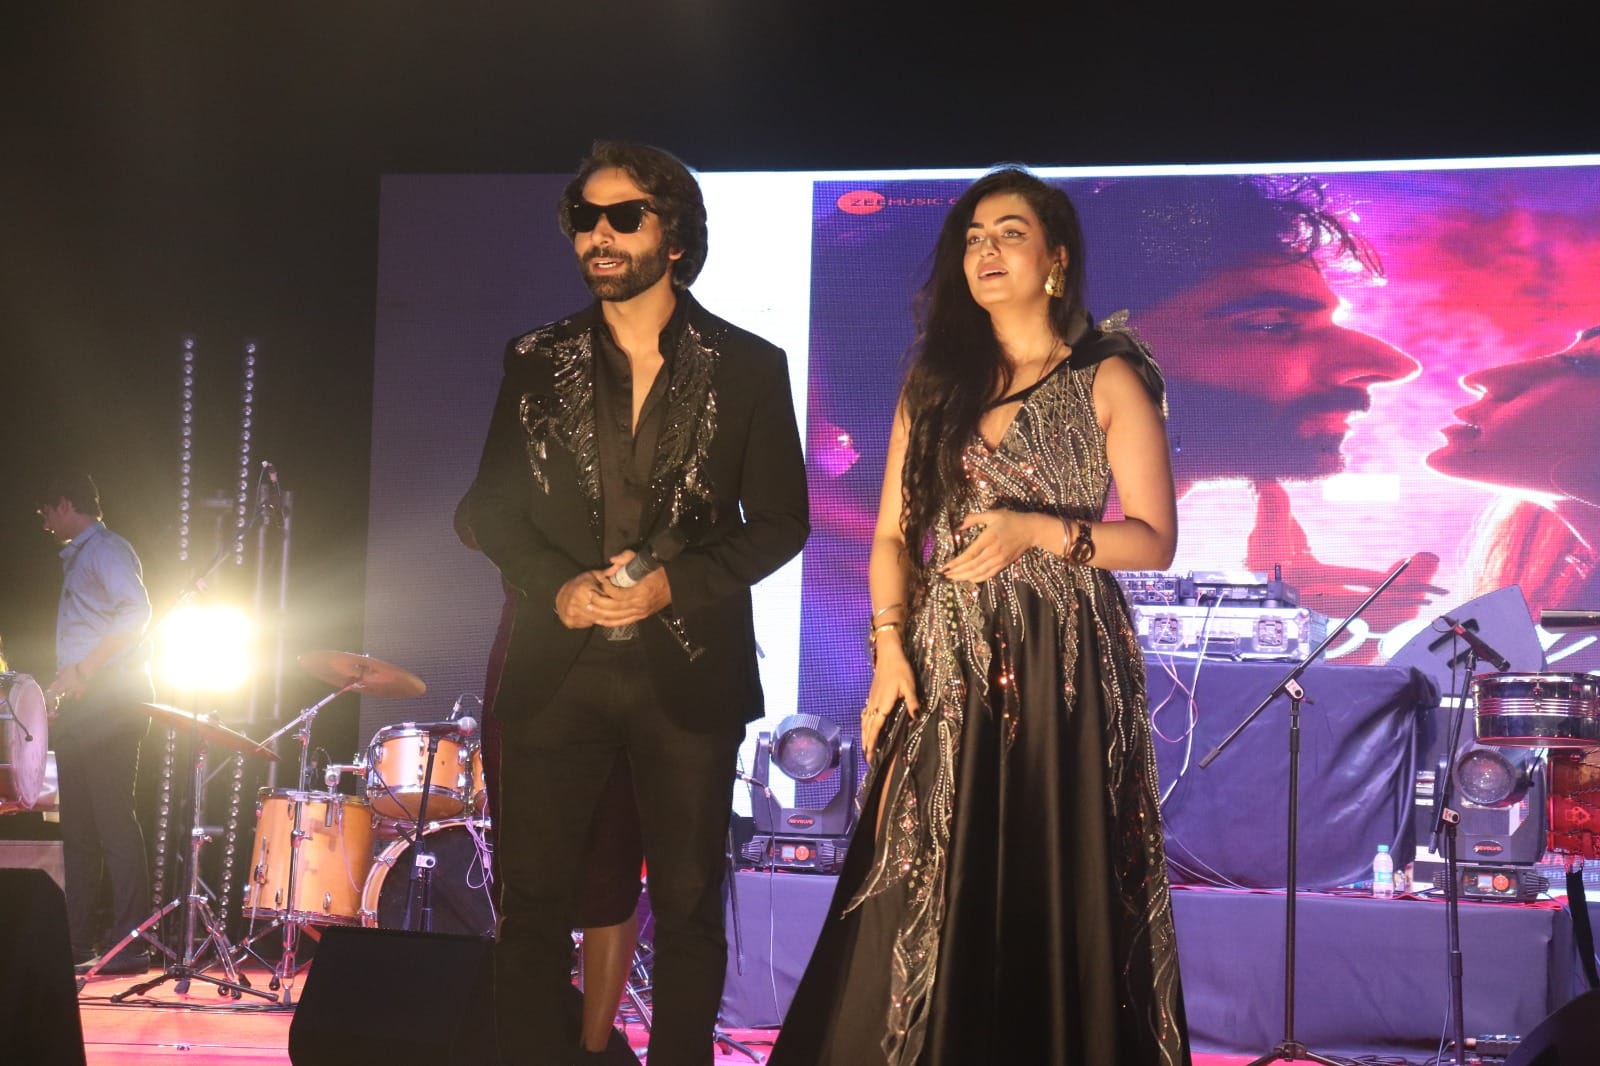 Zest 2023: Noida International University Takes Center Stage with Bollywood Glitz and Musical Magic – Celebrities Shine Bright!